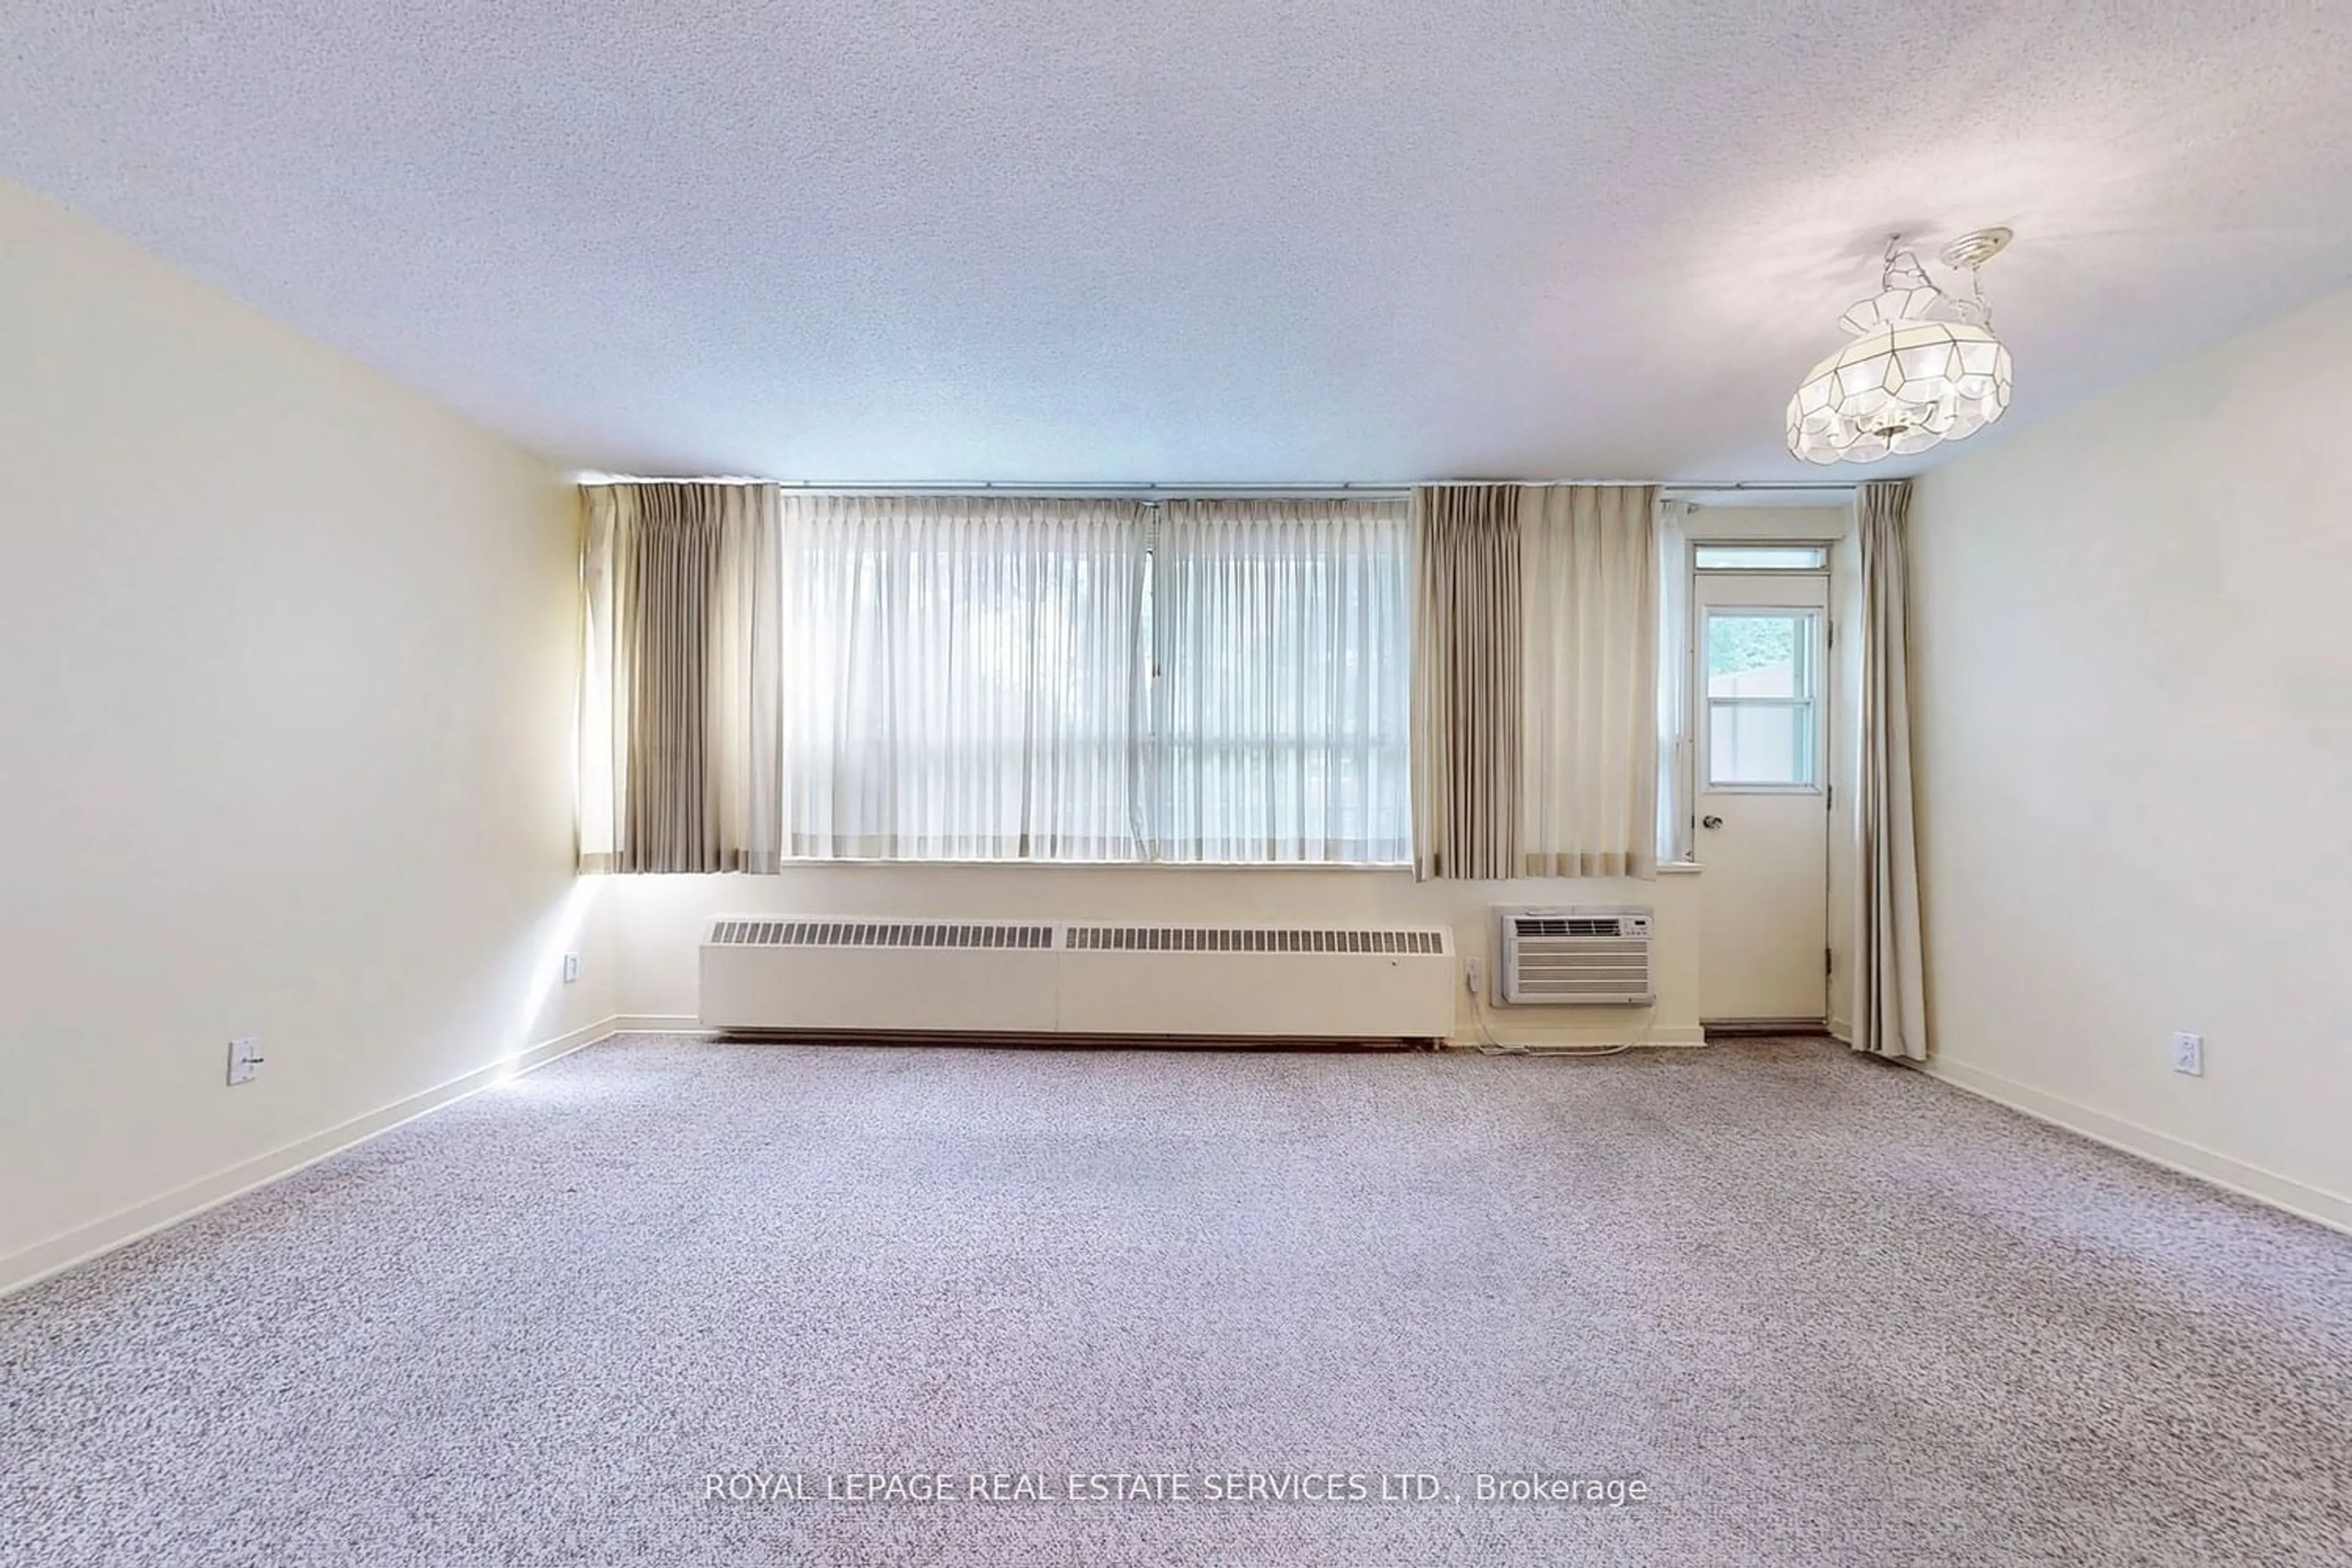 A pic of a room for 160 The Donway West #201, Toronto Ontario M3C 2G1